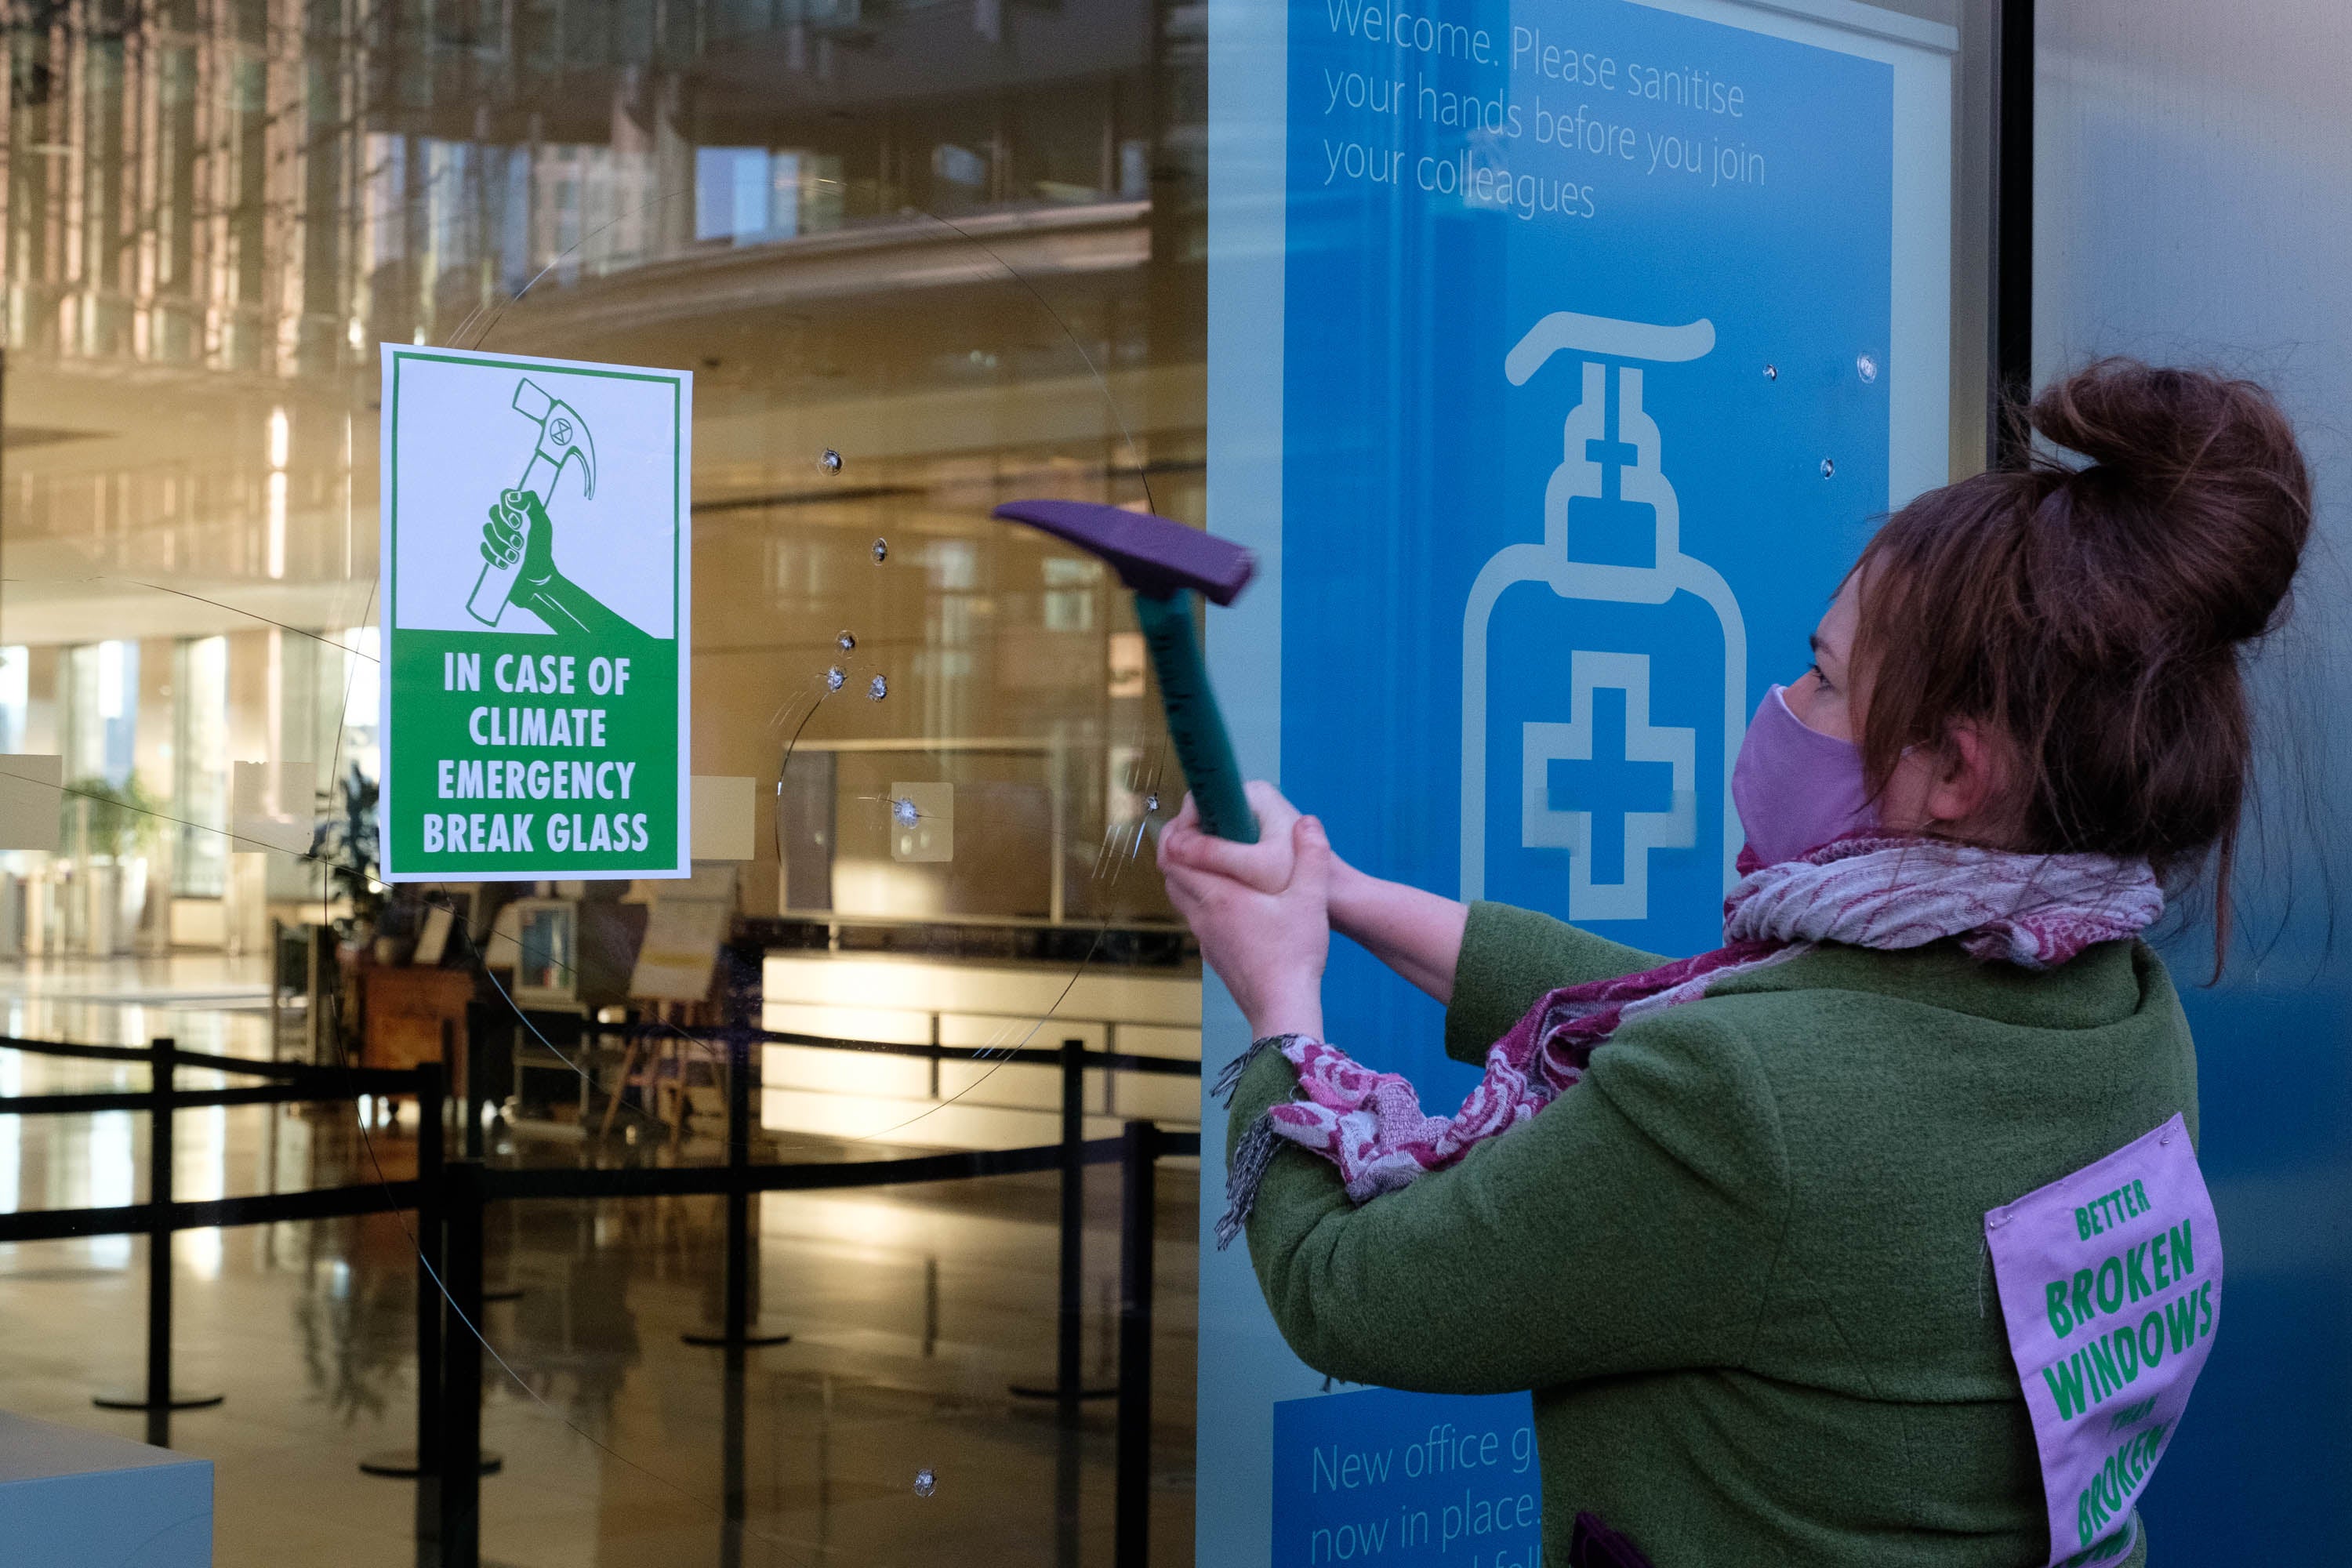 Photo issued by Extinction Rebellion of their protest at Barclays, where they used hammers and chisels to break windows